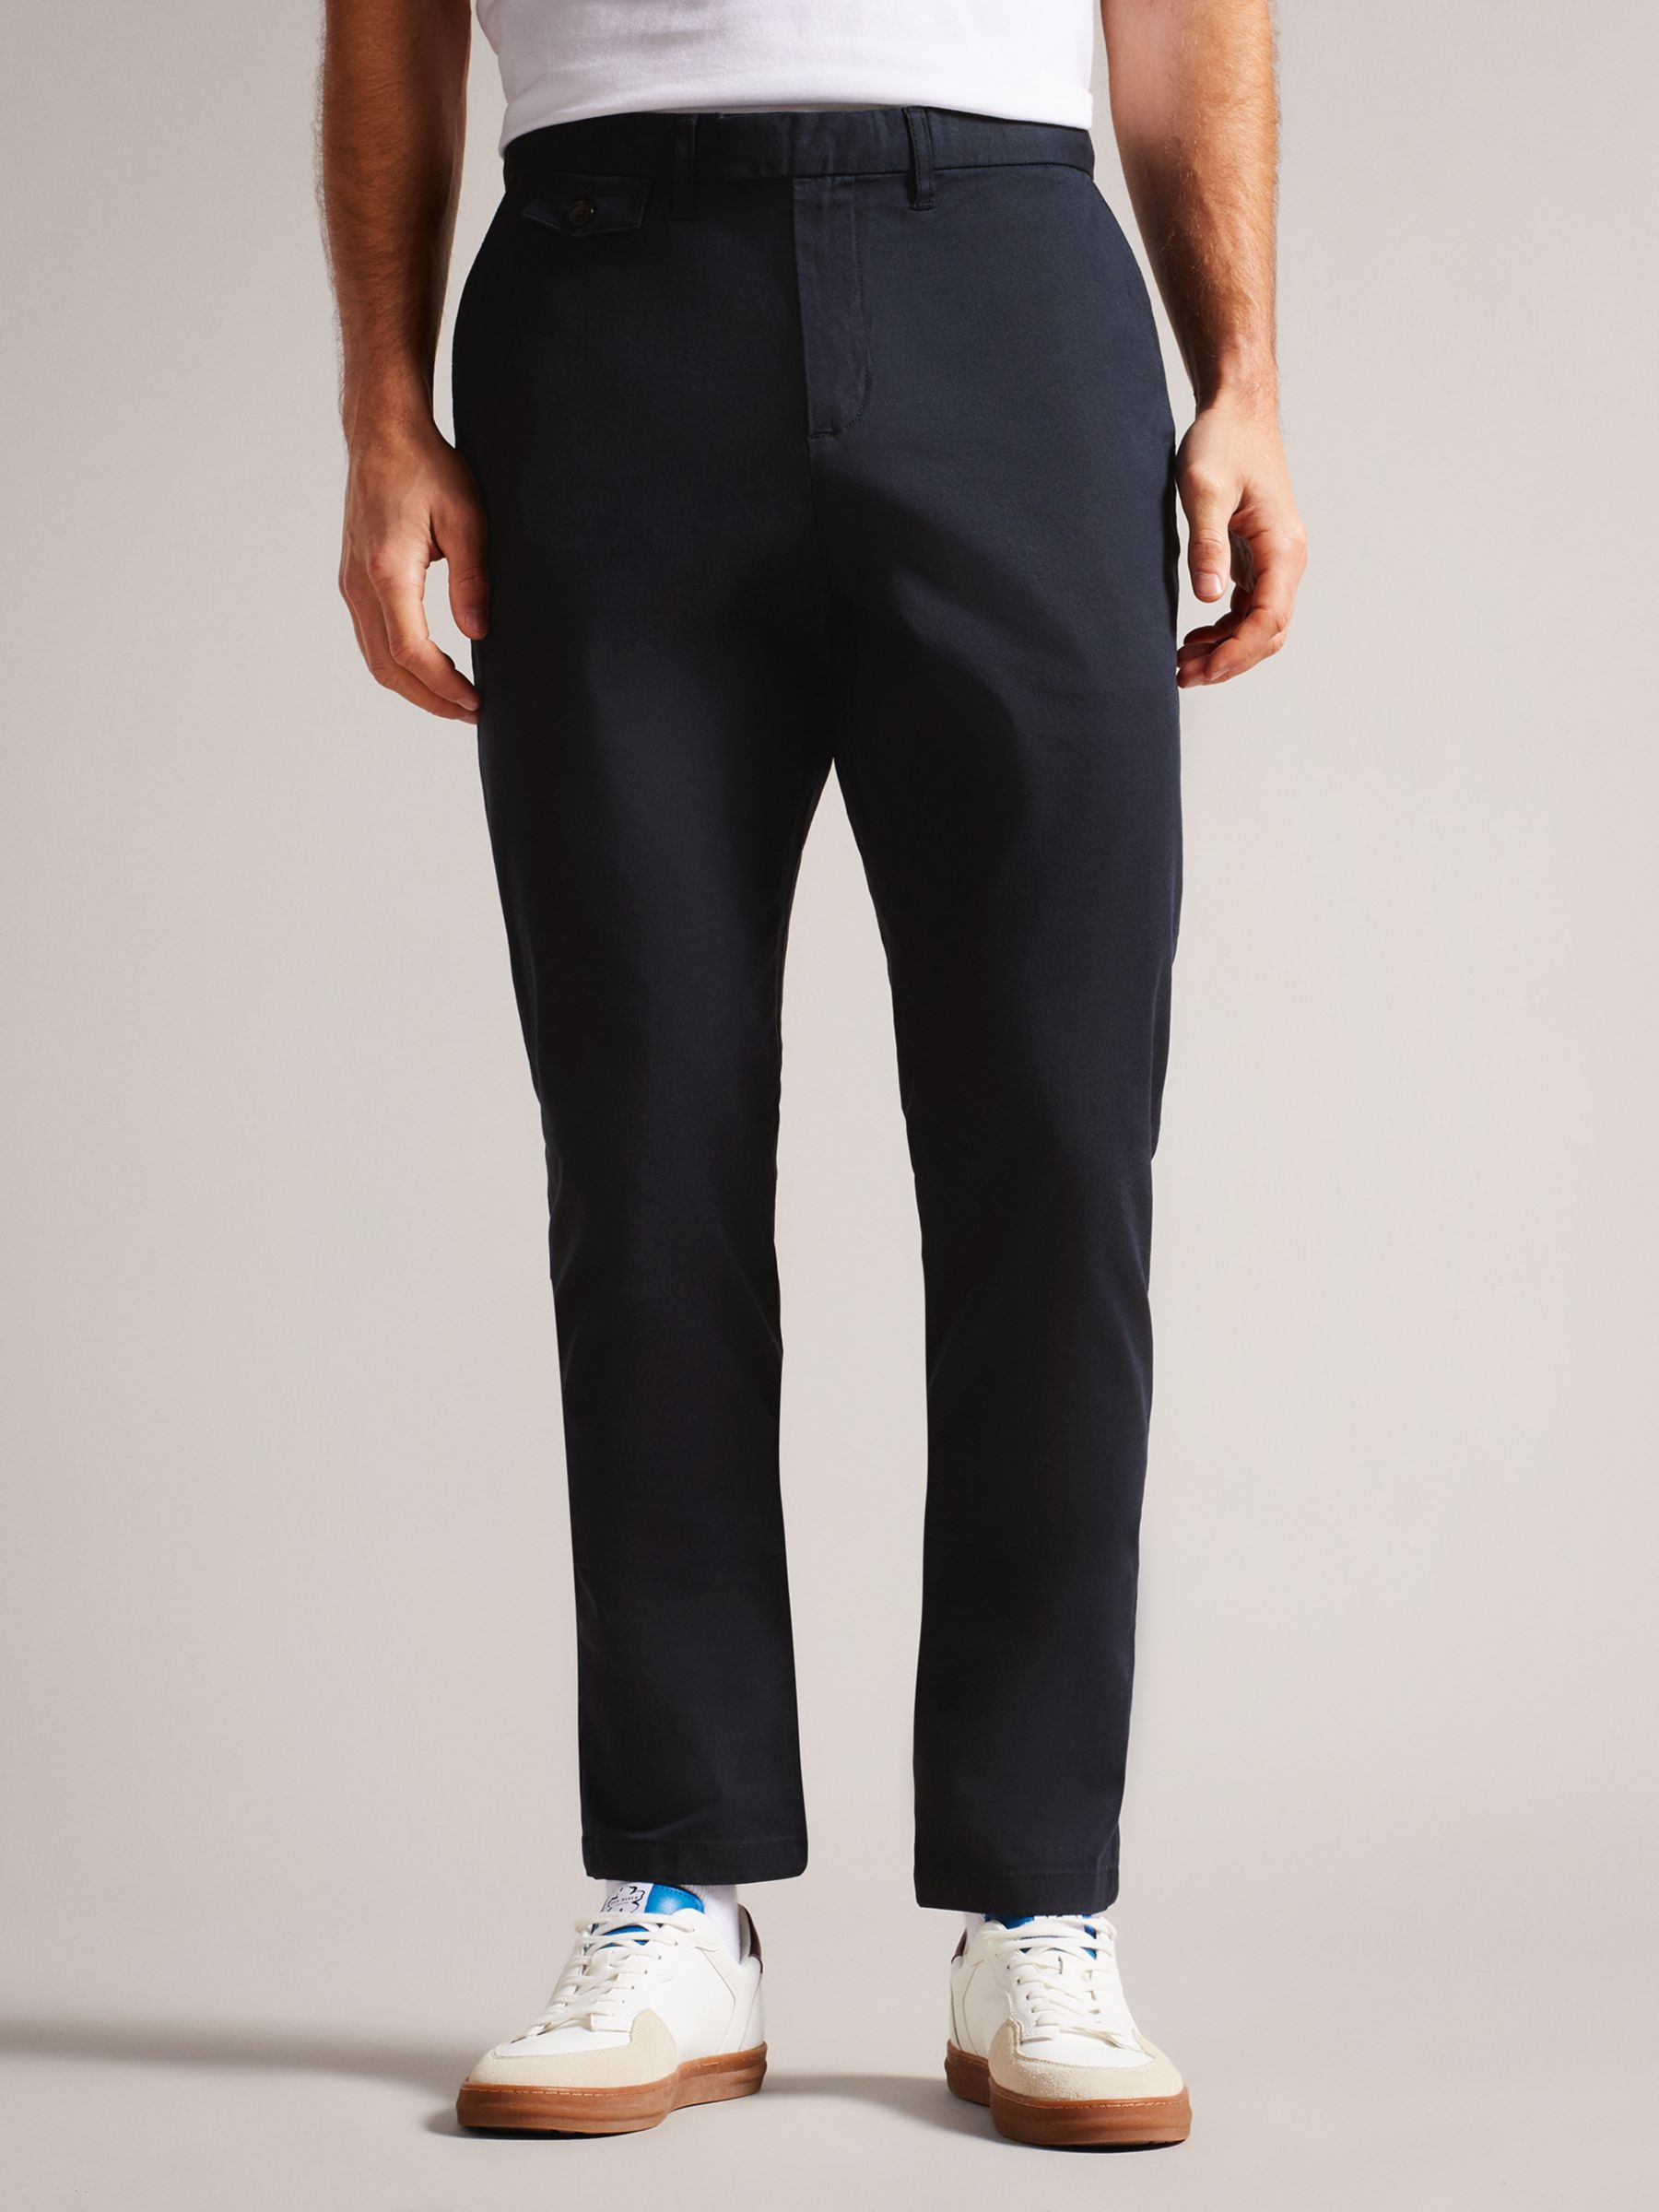 Ted Baker Haydae Slim Fit Textured Chinos, Navy at John Lewis & Partners